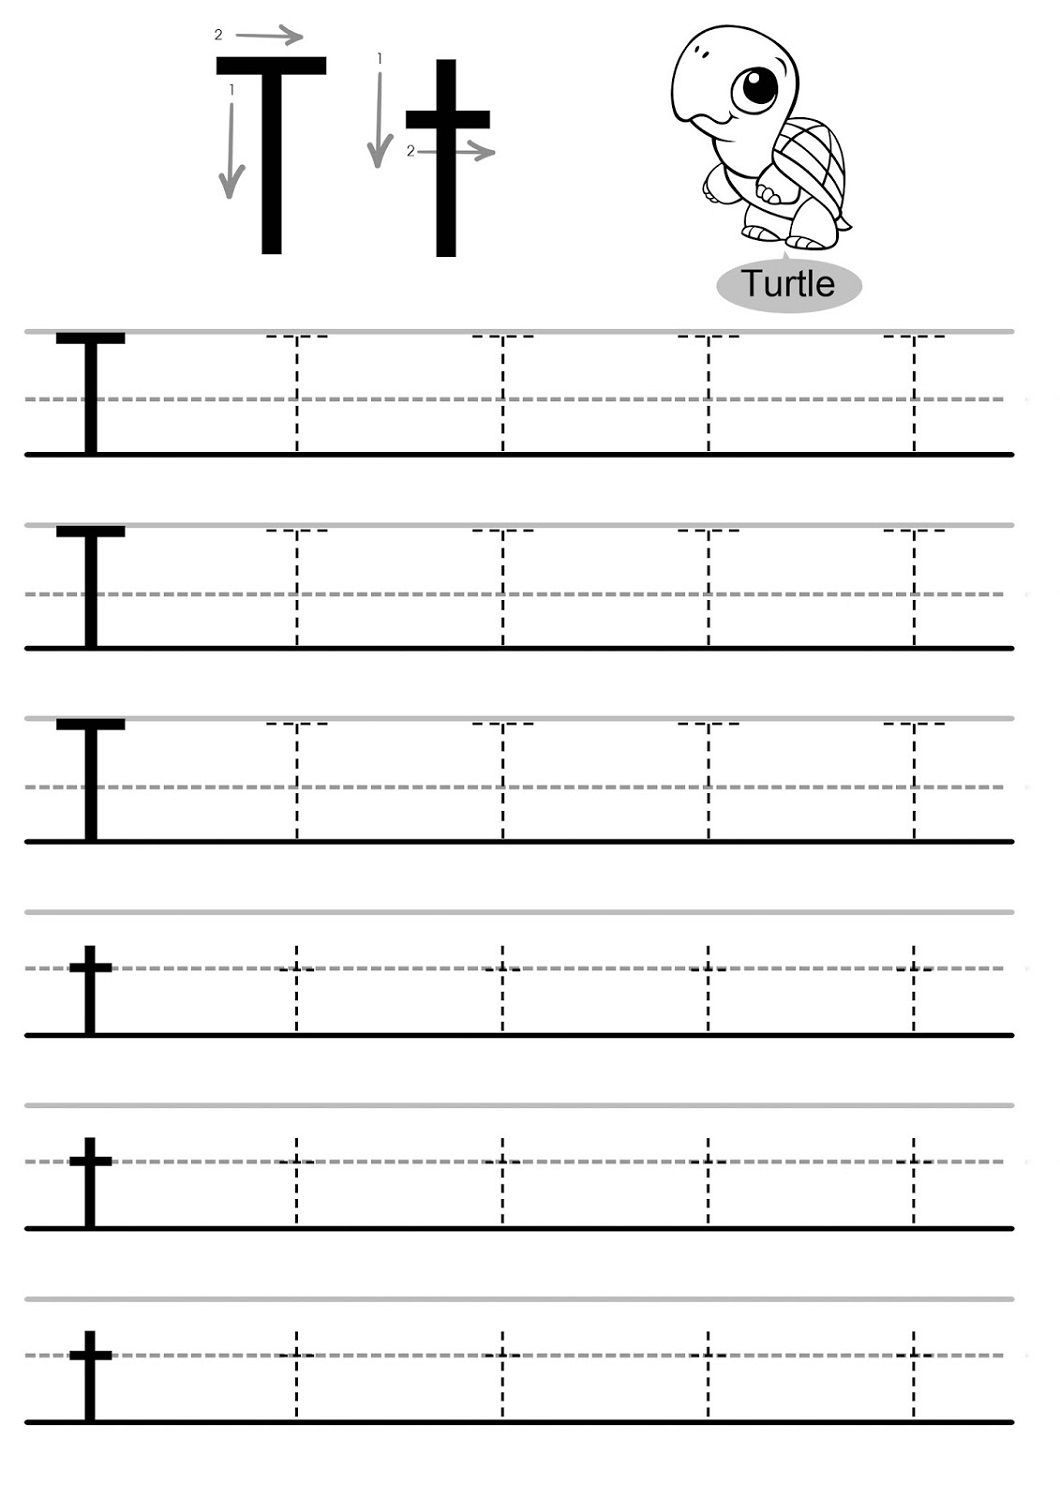 Traceable Letter Worksheets - Kids Learning Activity in Preschool Tracing Worksheets Letters